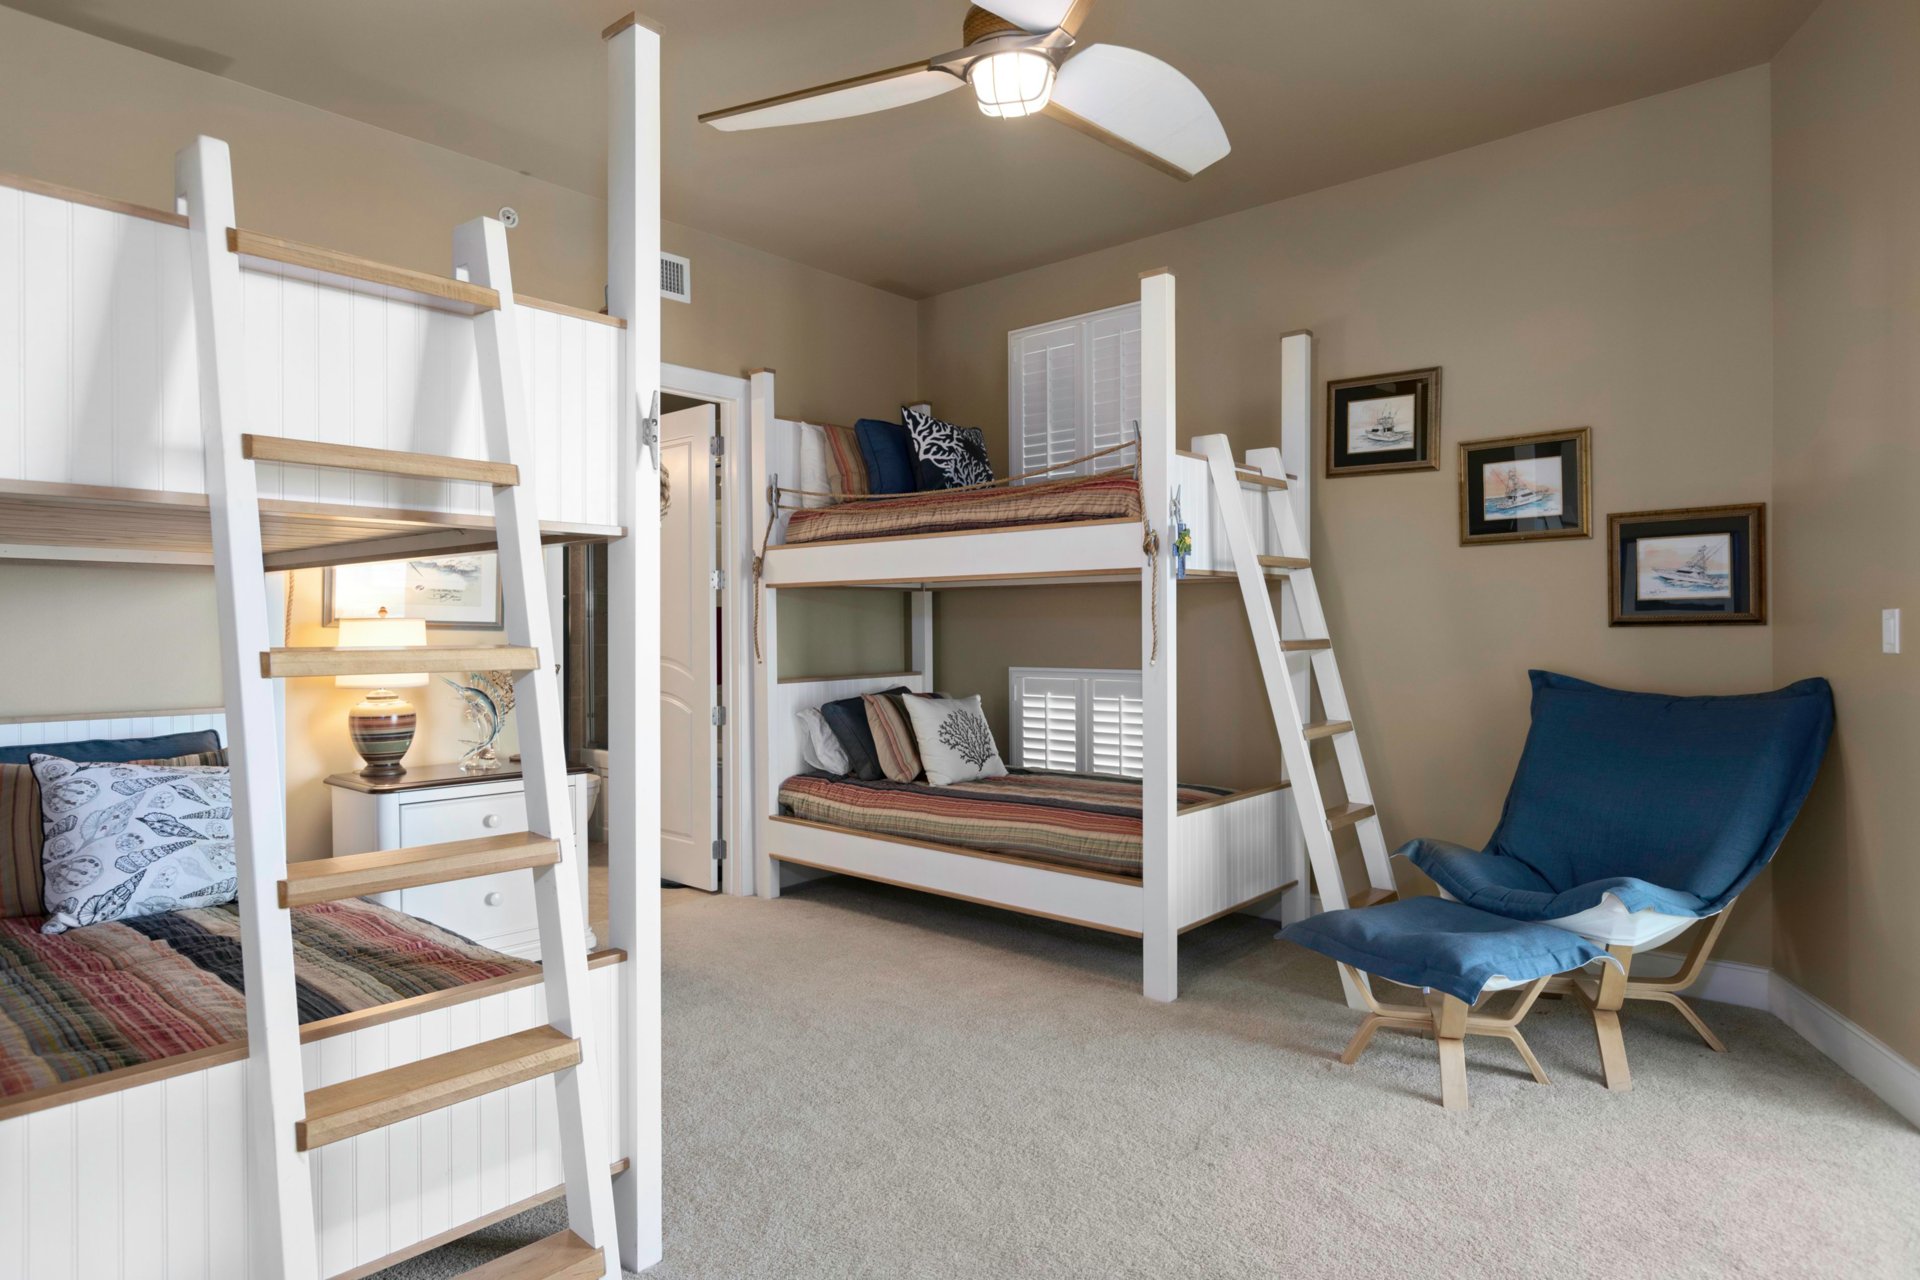 Third Guest Bedroom with Bunks